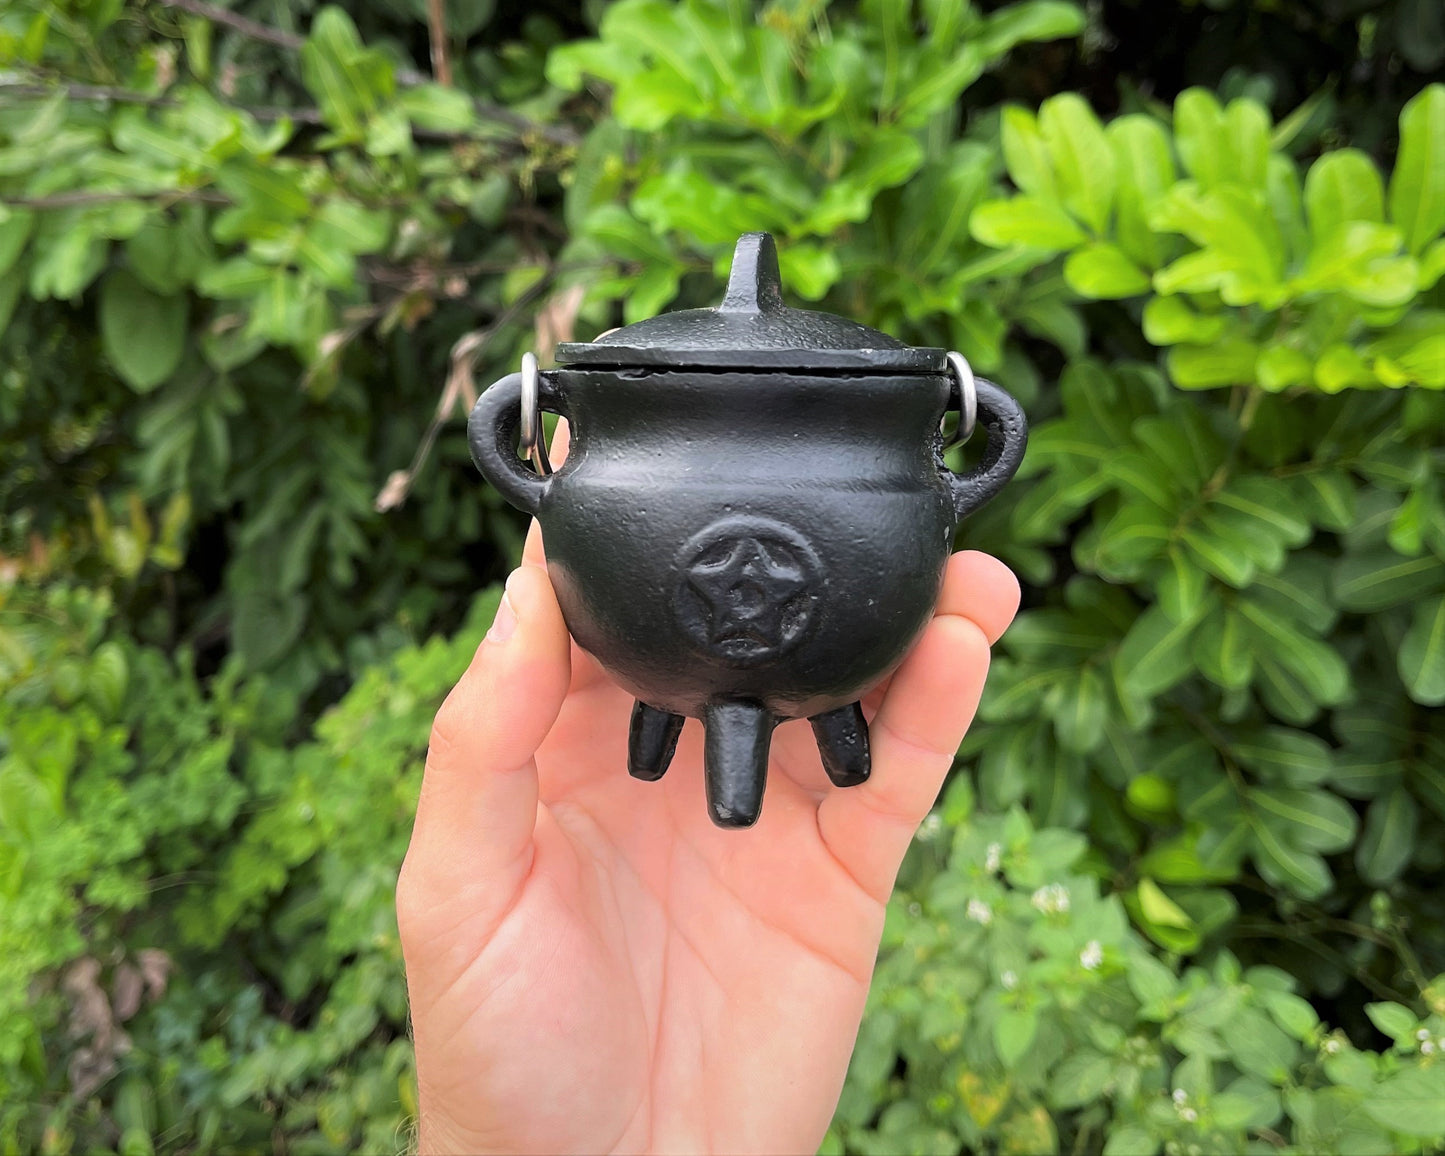 Pentagram Cast Iron Cauldron With Lid And Carry Handle